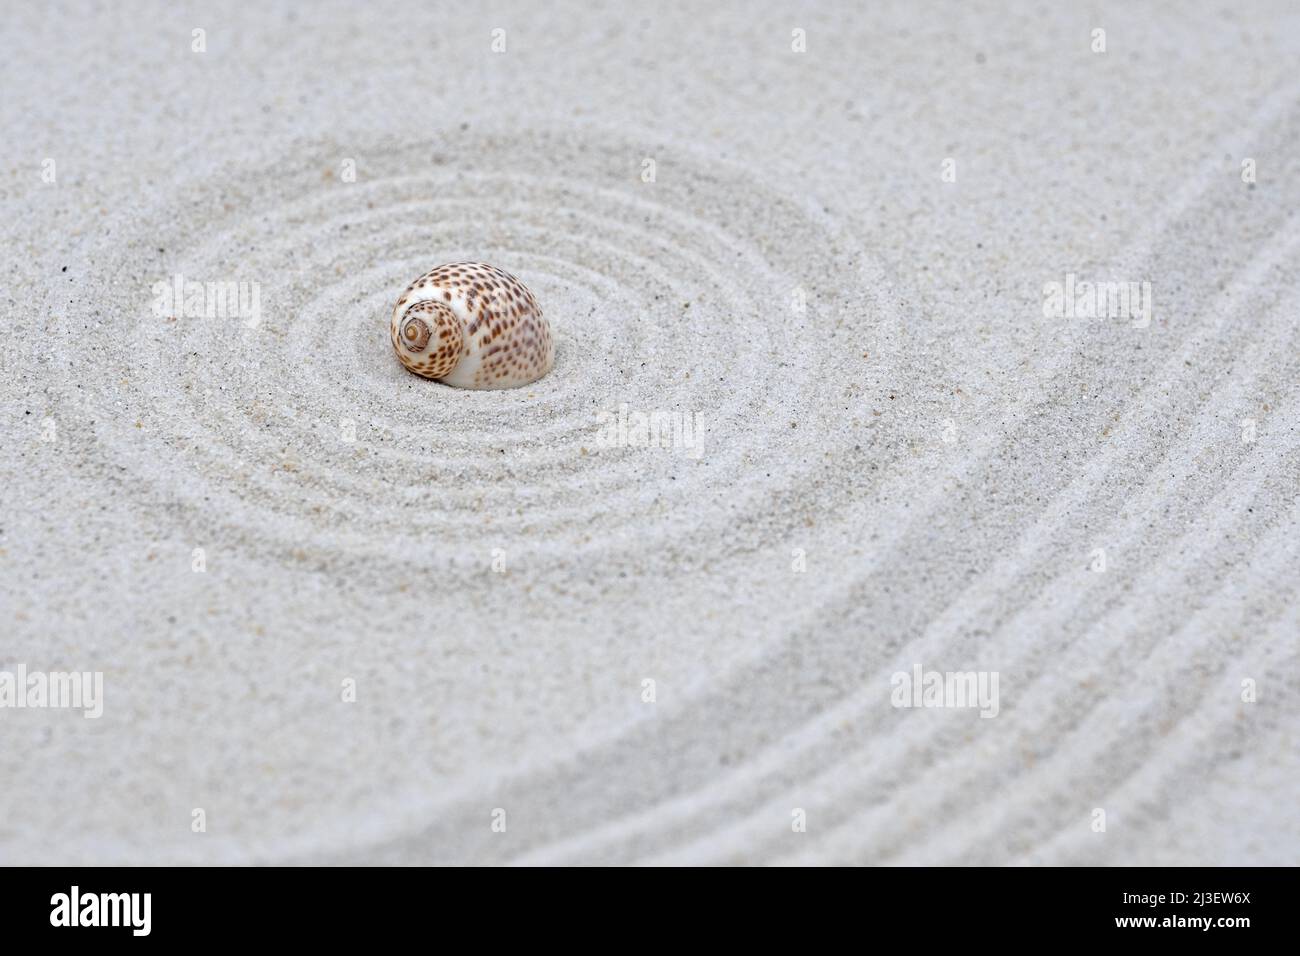 zen style, sand with s snail shell Stock Photo